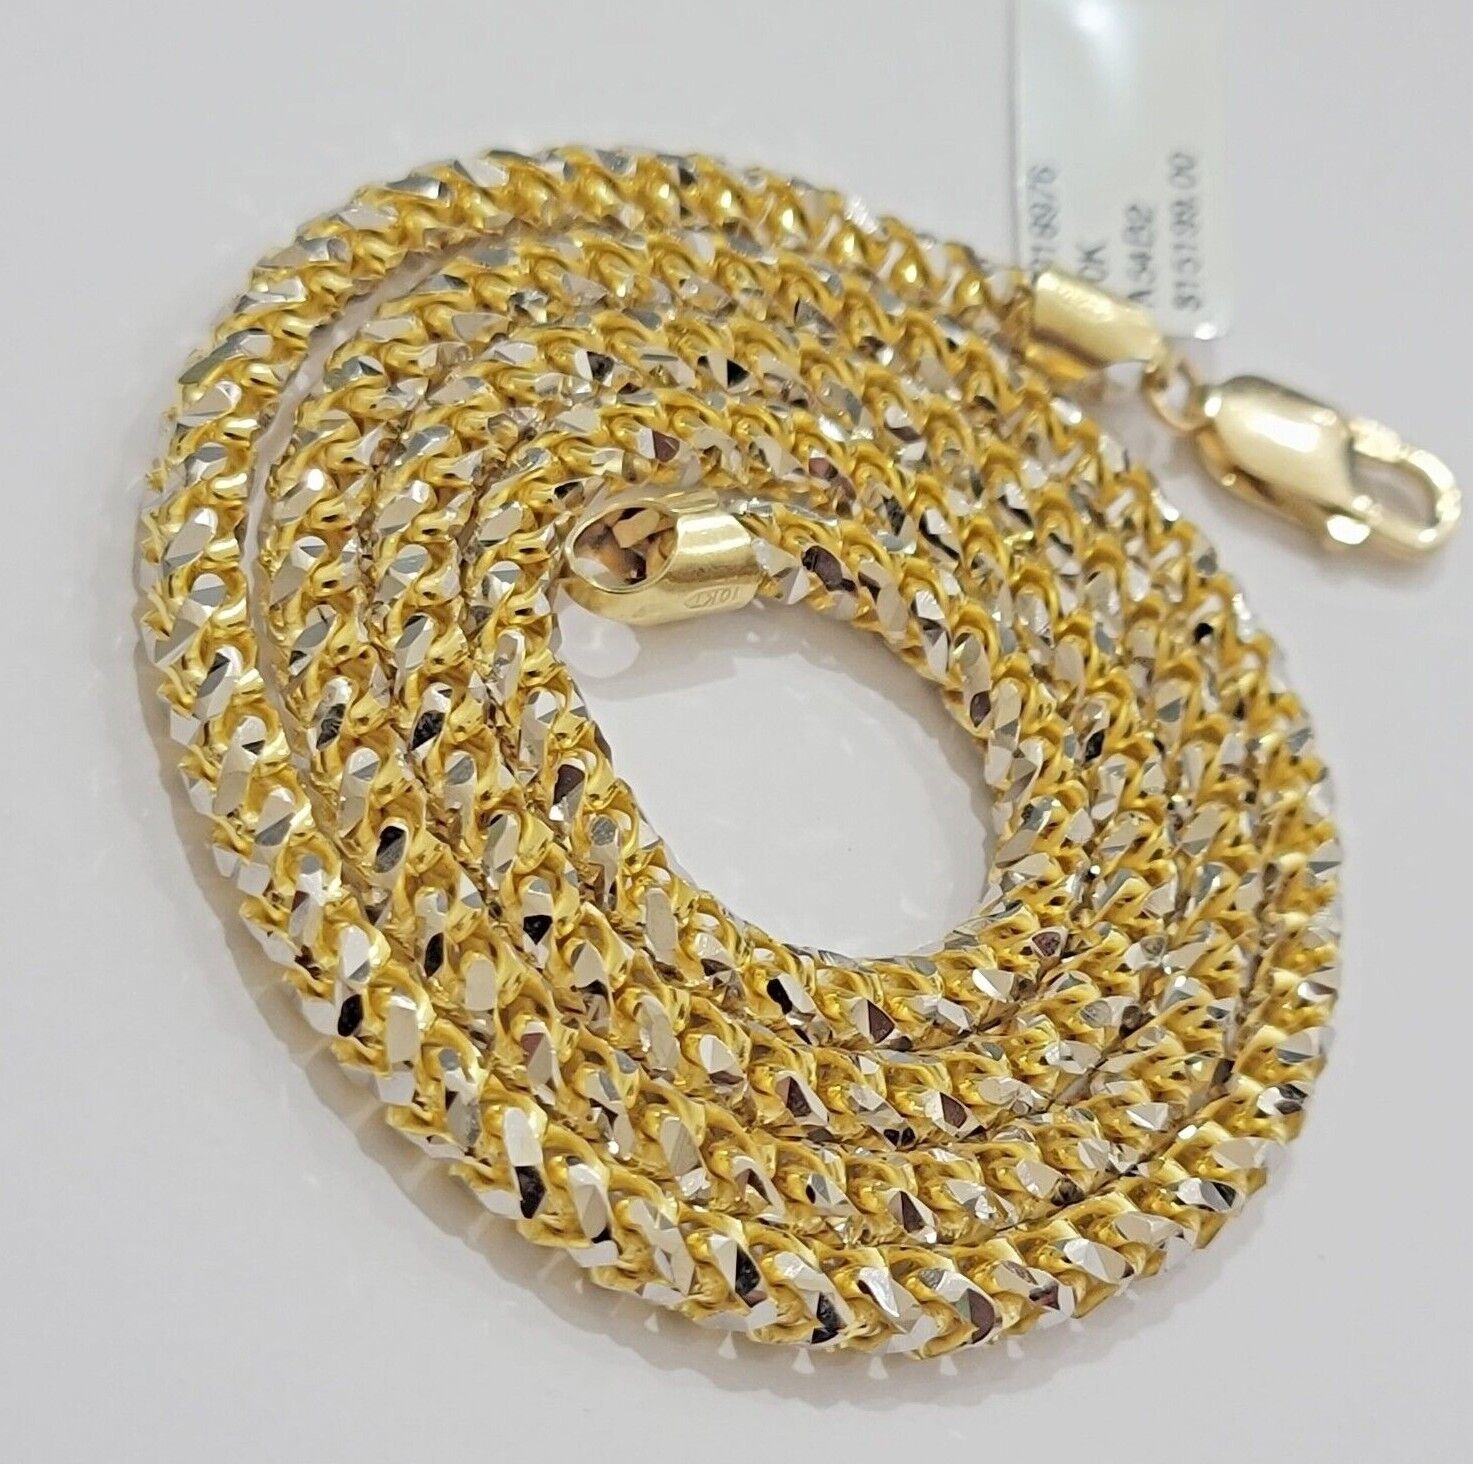 Real 10k Gold Solid Palm Chain Necklace Diamond Cut 4.5mm 24" 10kt DISOCUNT